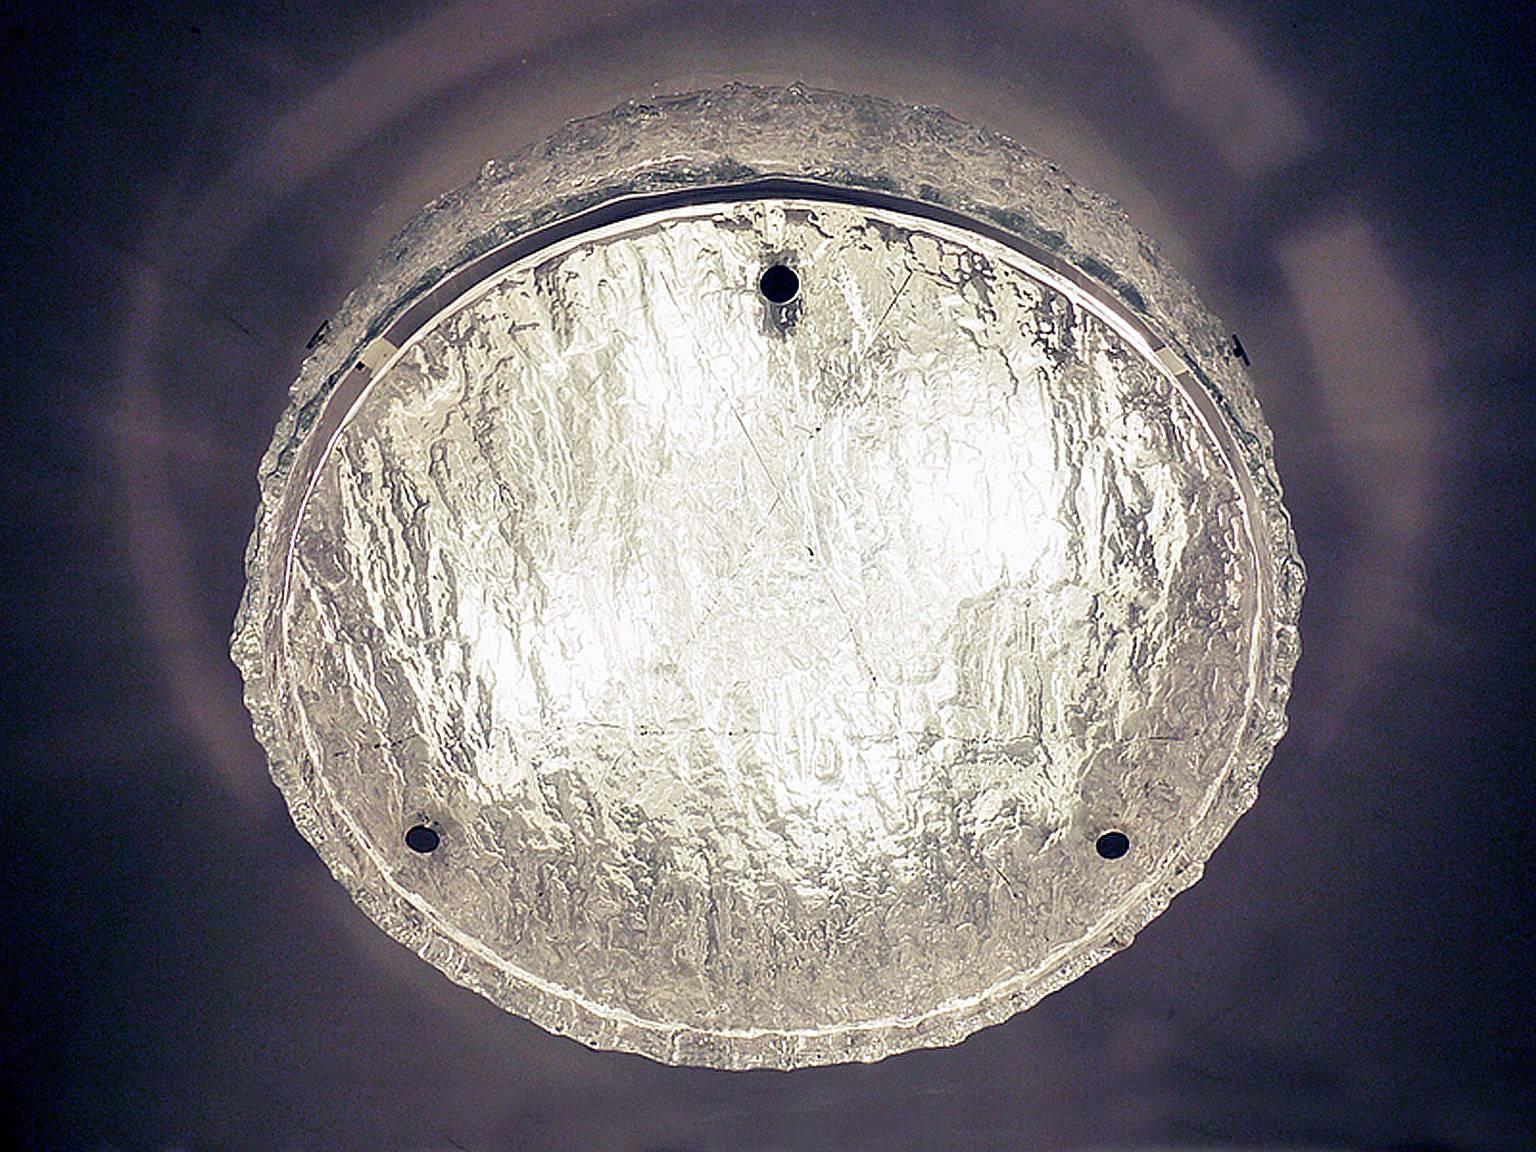 Elegant large two part drum-shaped flush mount ceiling light with one ring outside and a flat disc made of heavy textured clear iced glass on a white metal frame with chromed nickel finals. Manufactured by Kaiser Lighting, Germany in the 1960s.